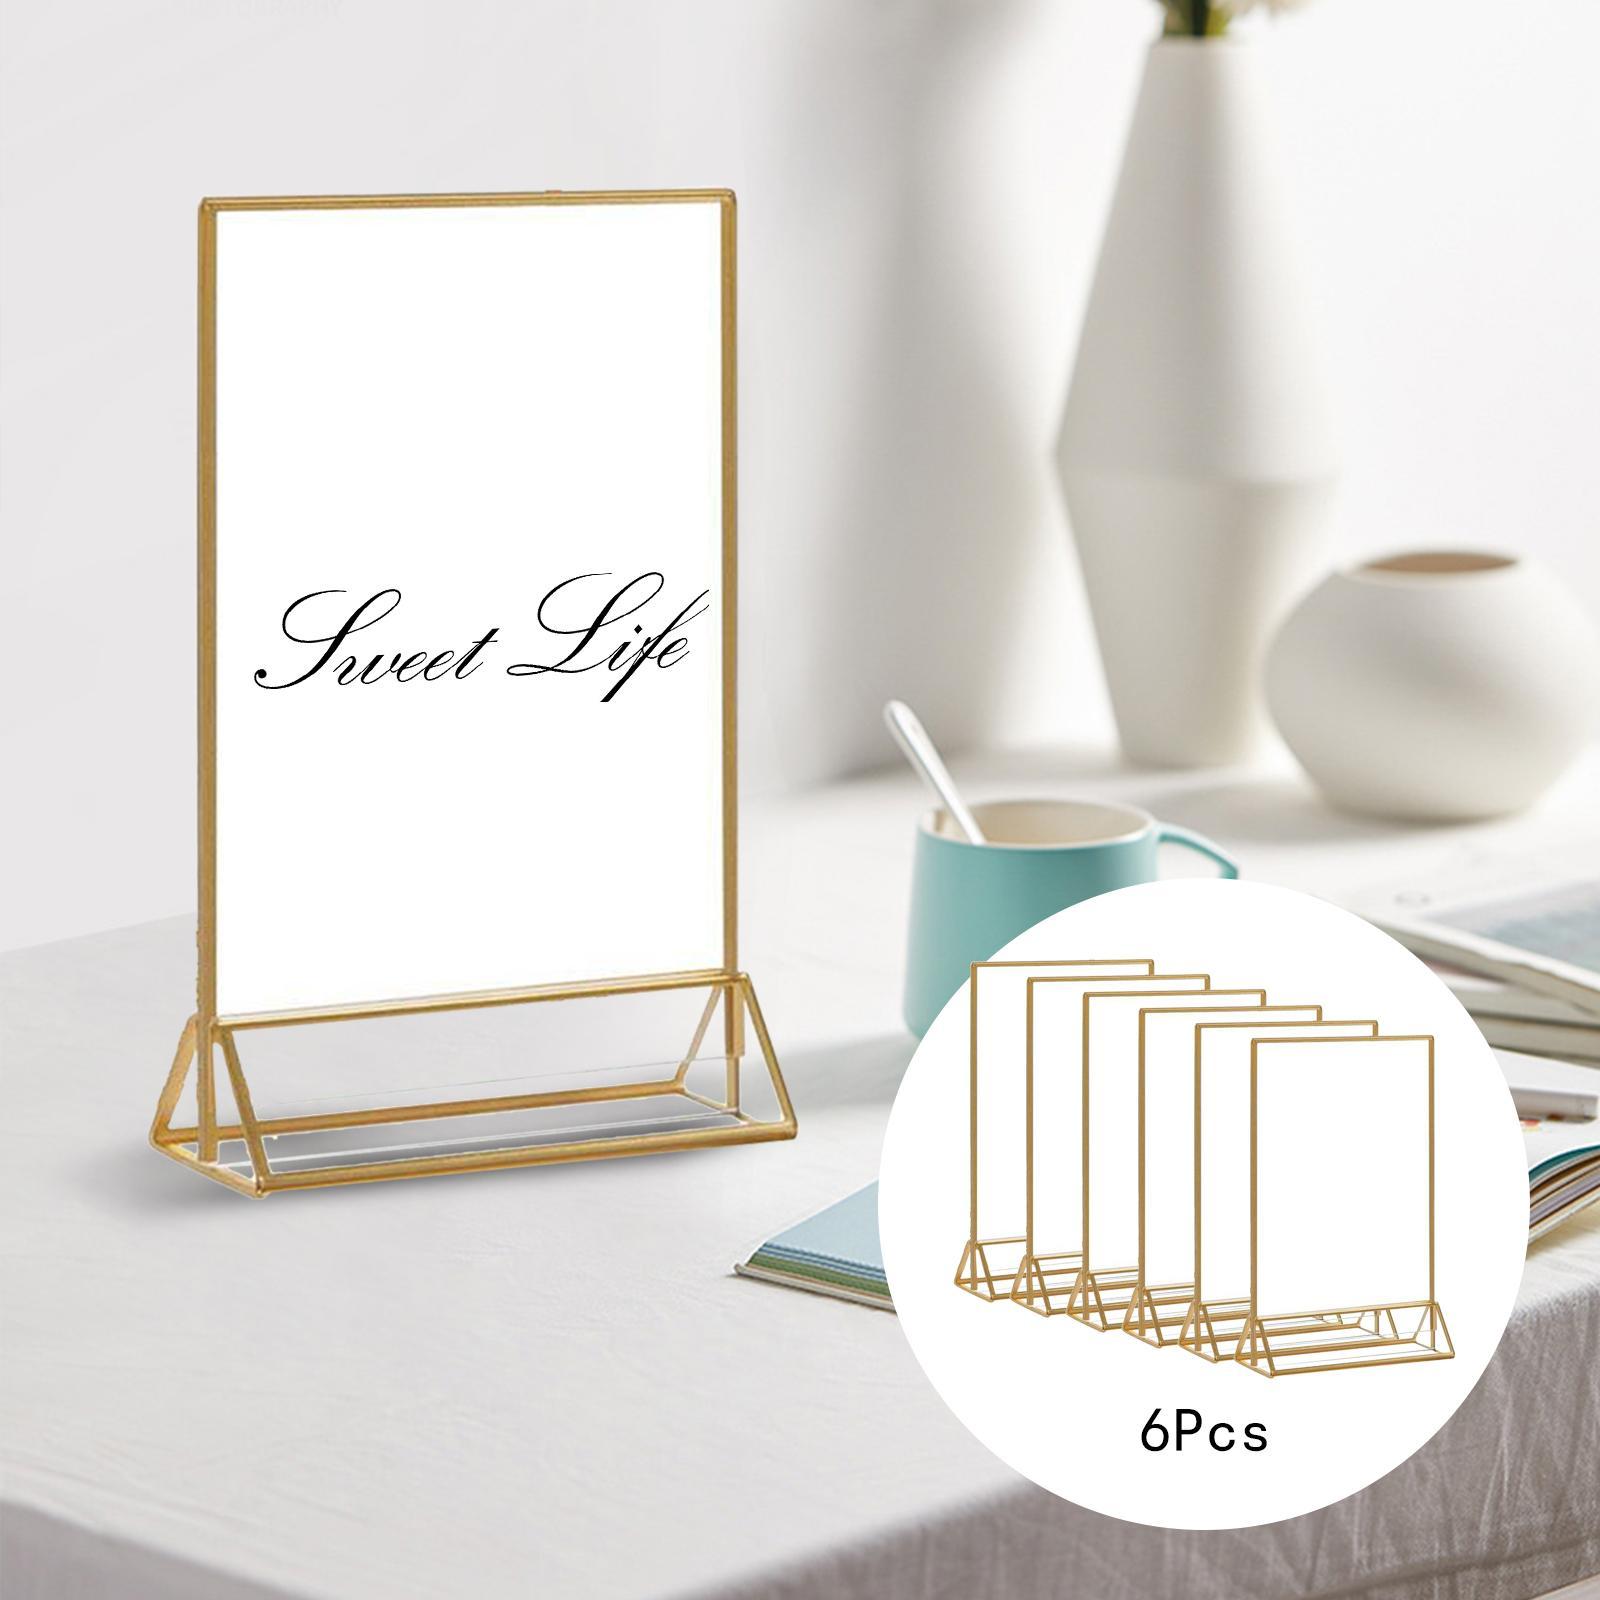 6Pcs Acrylic Sign Holder Table Menu Display Stand Wedding Store Stand Document Meetings Poster Sign Holder Flyer Display